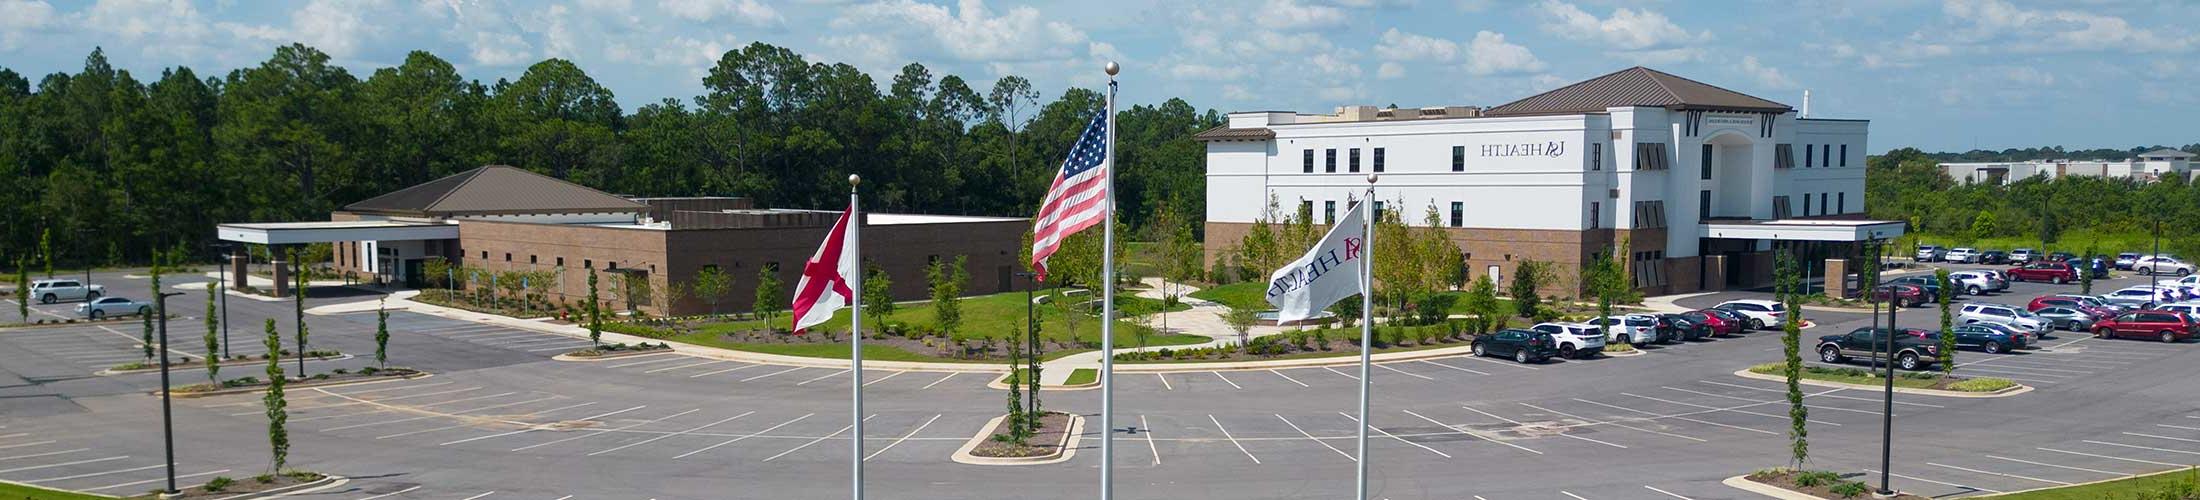 USA Health facility with flags in front.